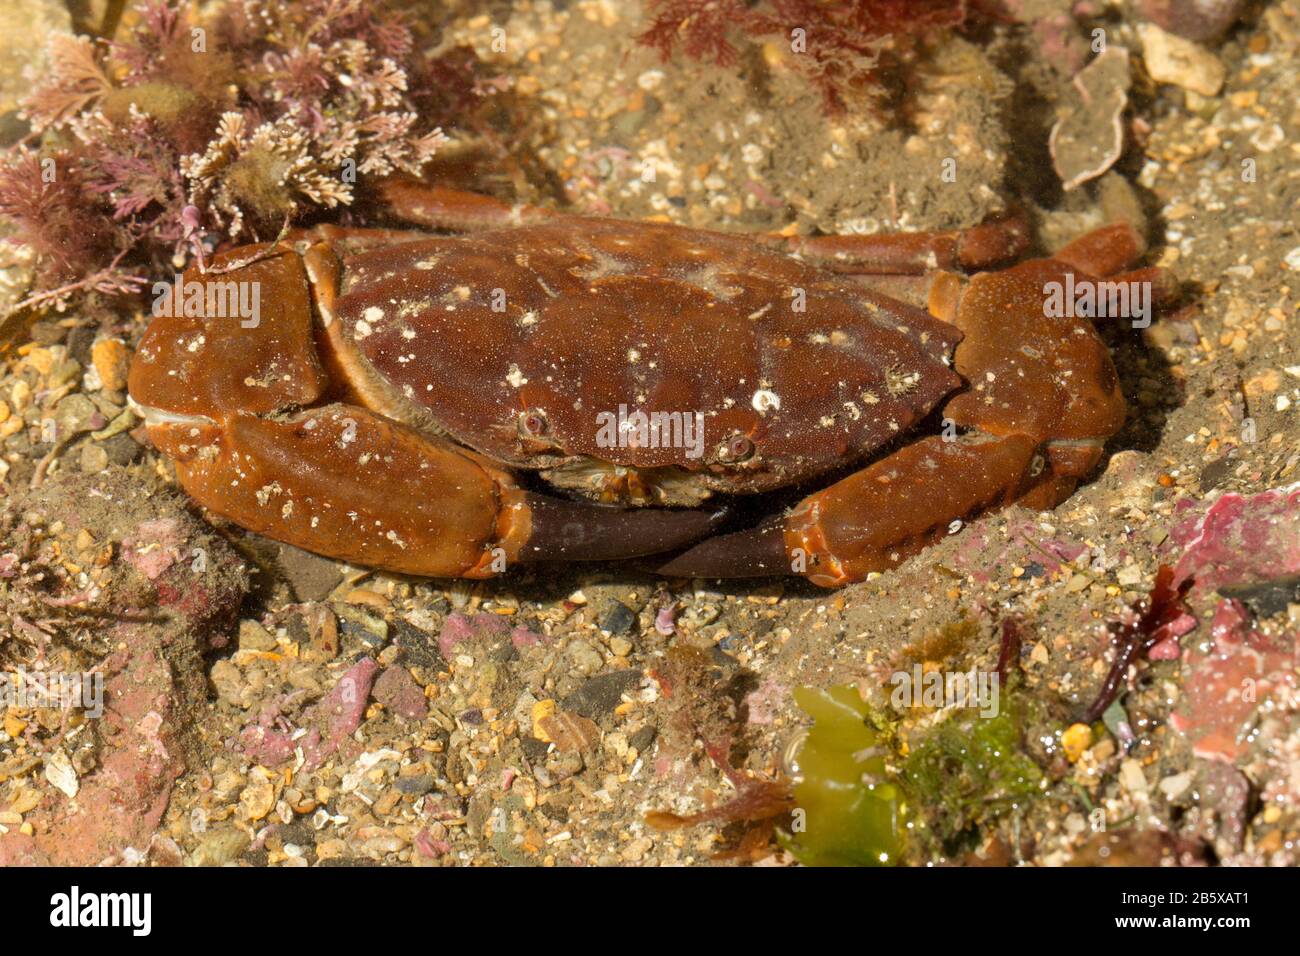 Furrowed crab Xantho hydrophilus Stock Photo